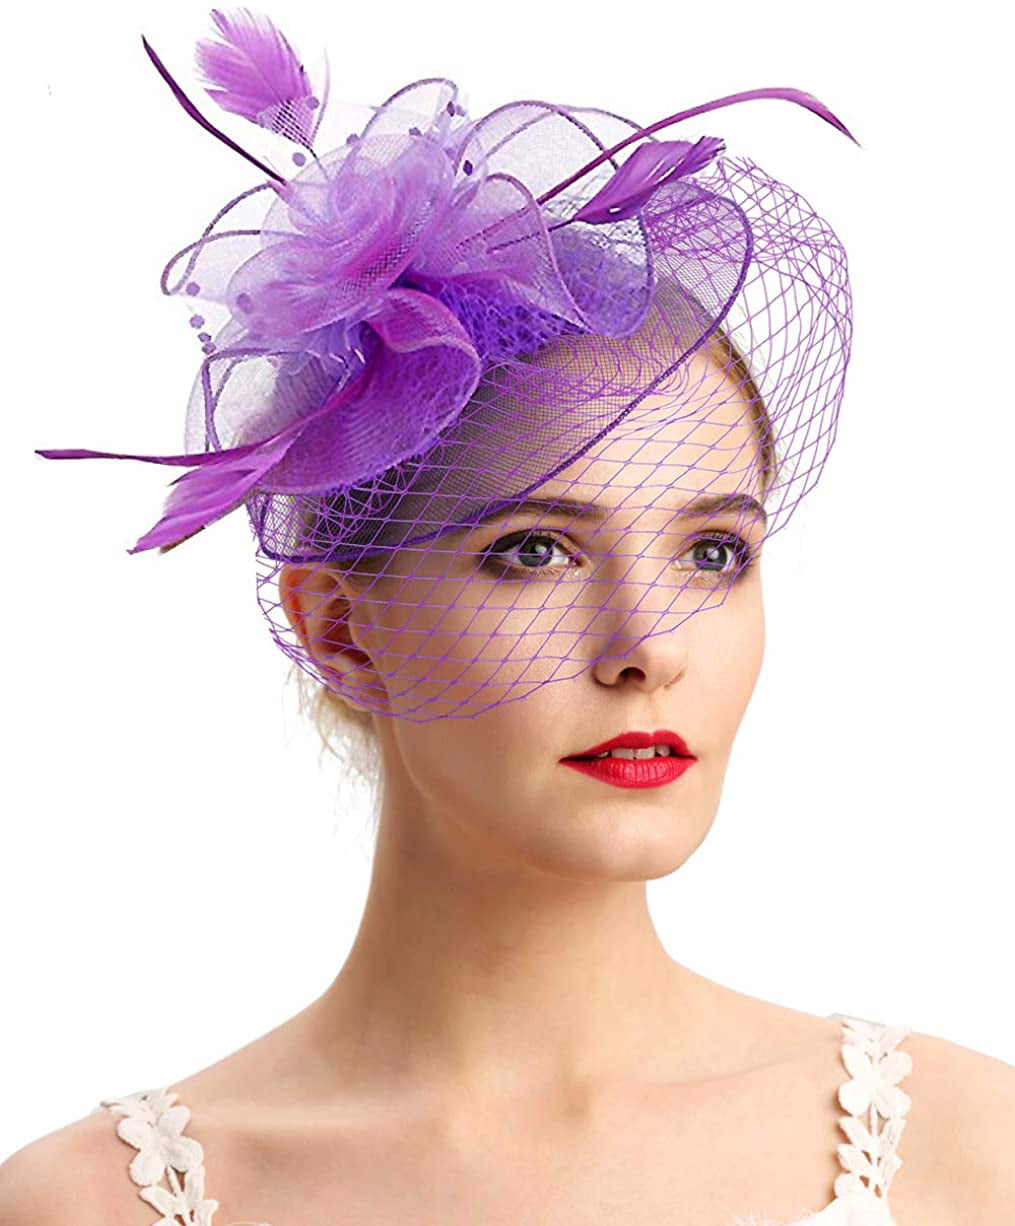 FASCINATORS IN 3 COLOURS  NETTING AND FEATHERS  ON A COMB 4" x 8" length 